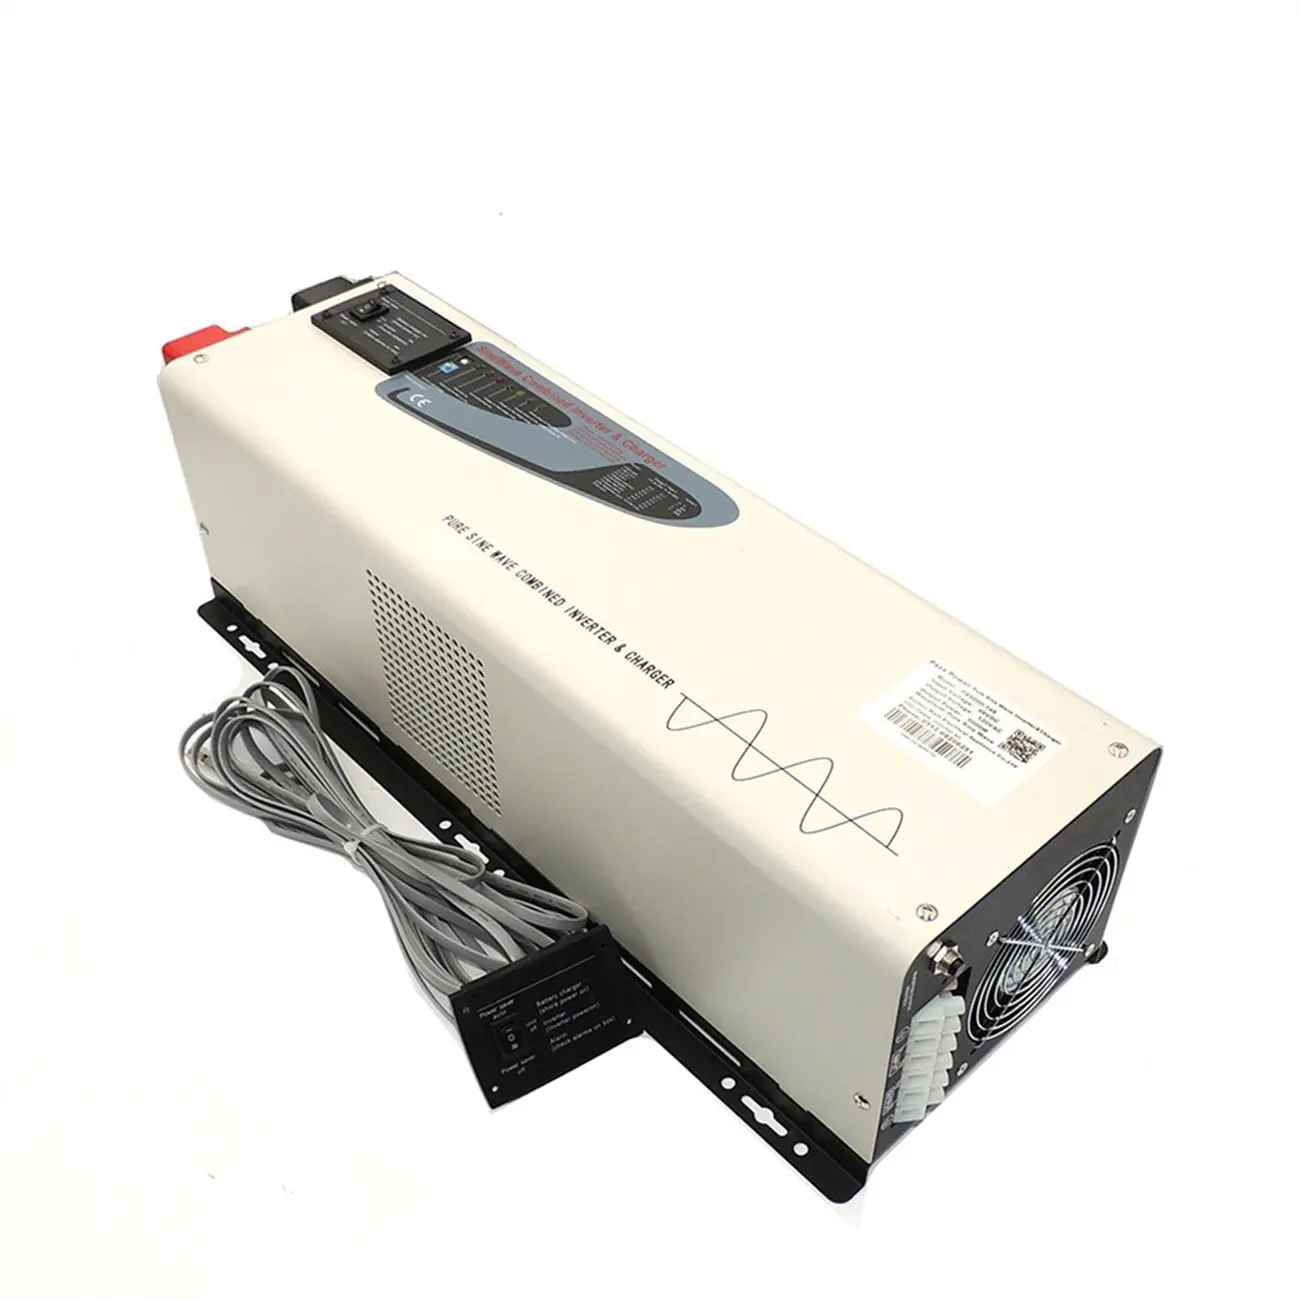 Best sellers vehichi pure sine wave 5000w motor pv home inverter ups import china goods,CE&ROHS approved ,2 years warranty !